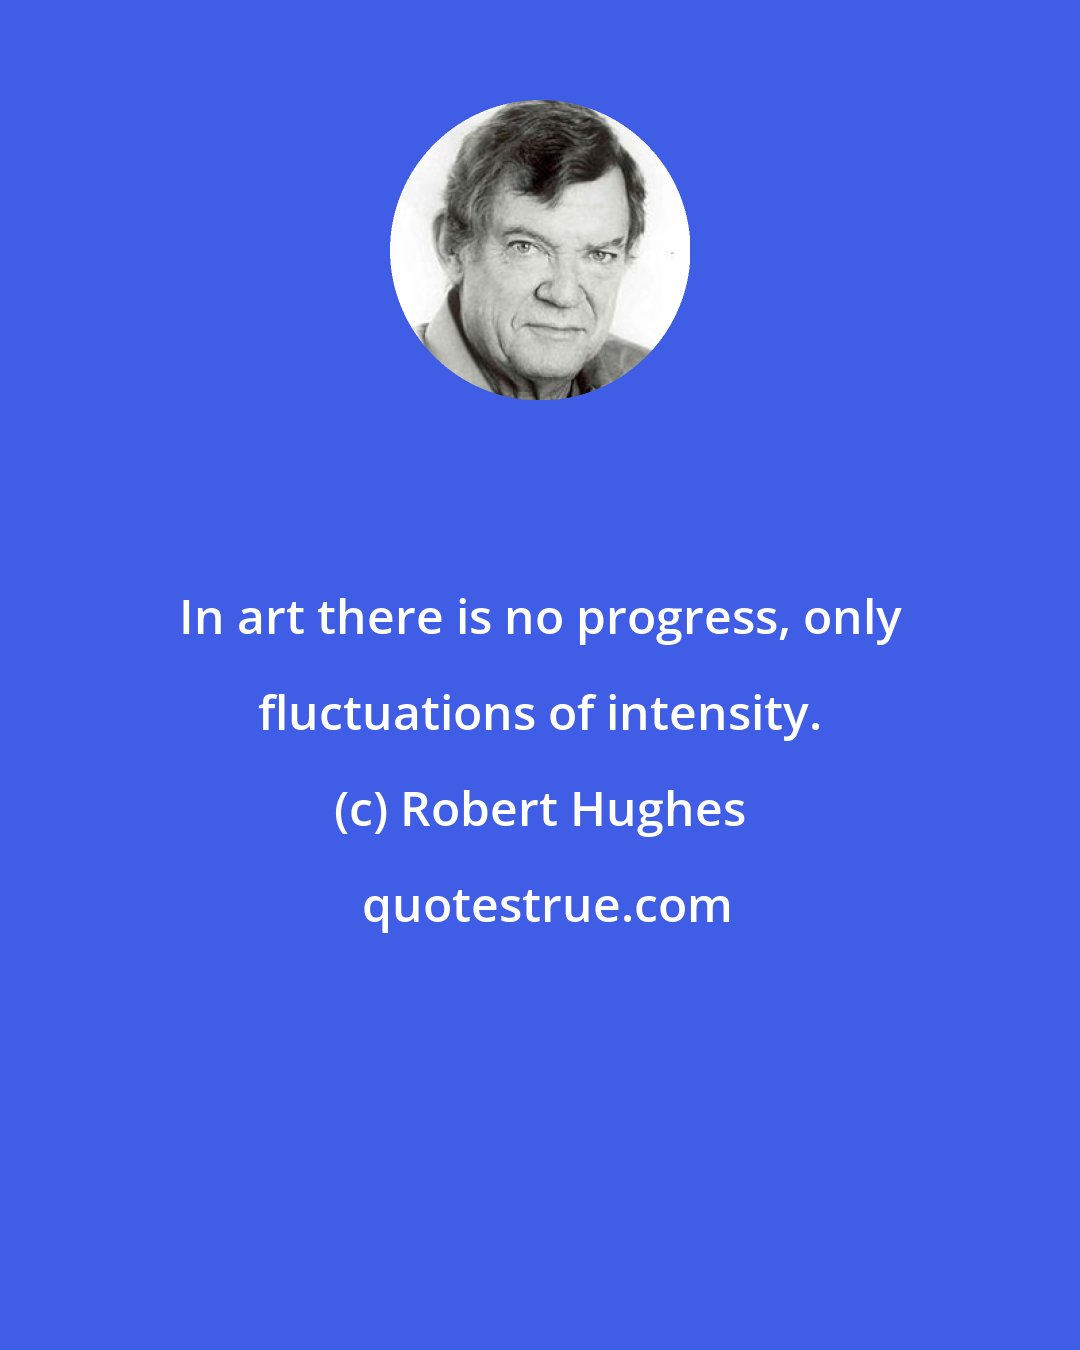 Robert Hughes: In art there is no progress, only fluctuations of intensity.